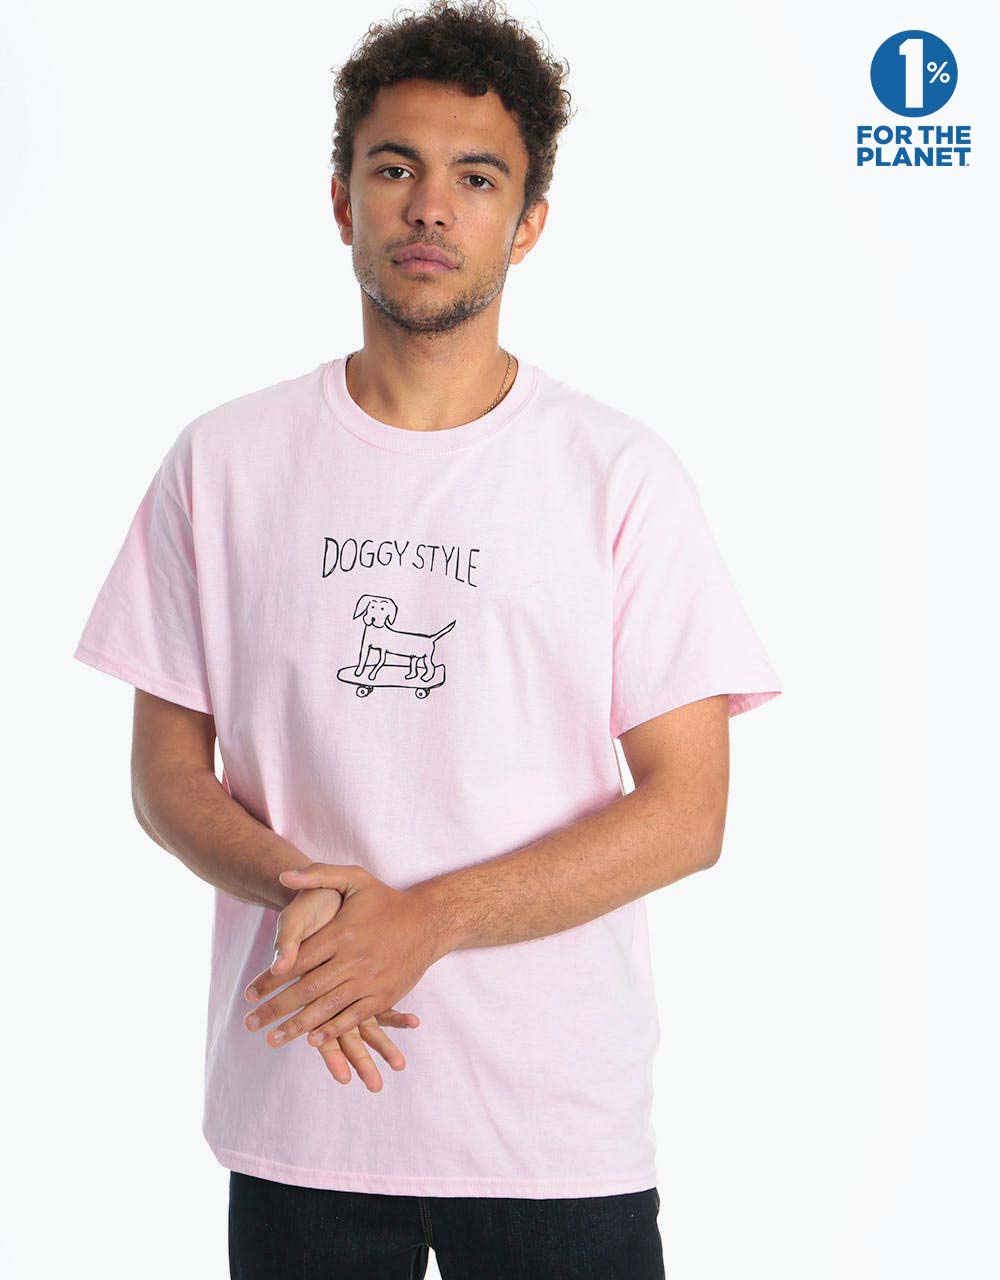 Route One Doggy Style T-Shirt - Light Pink